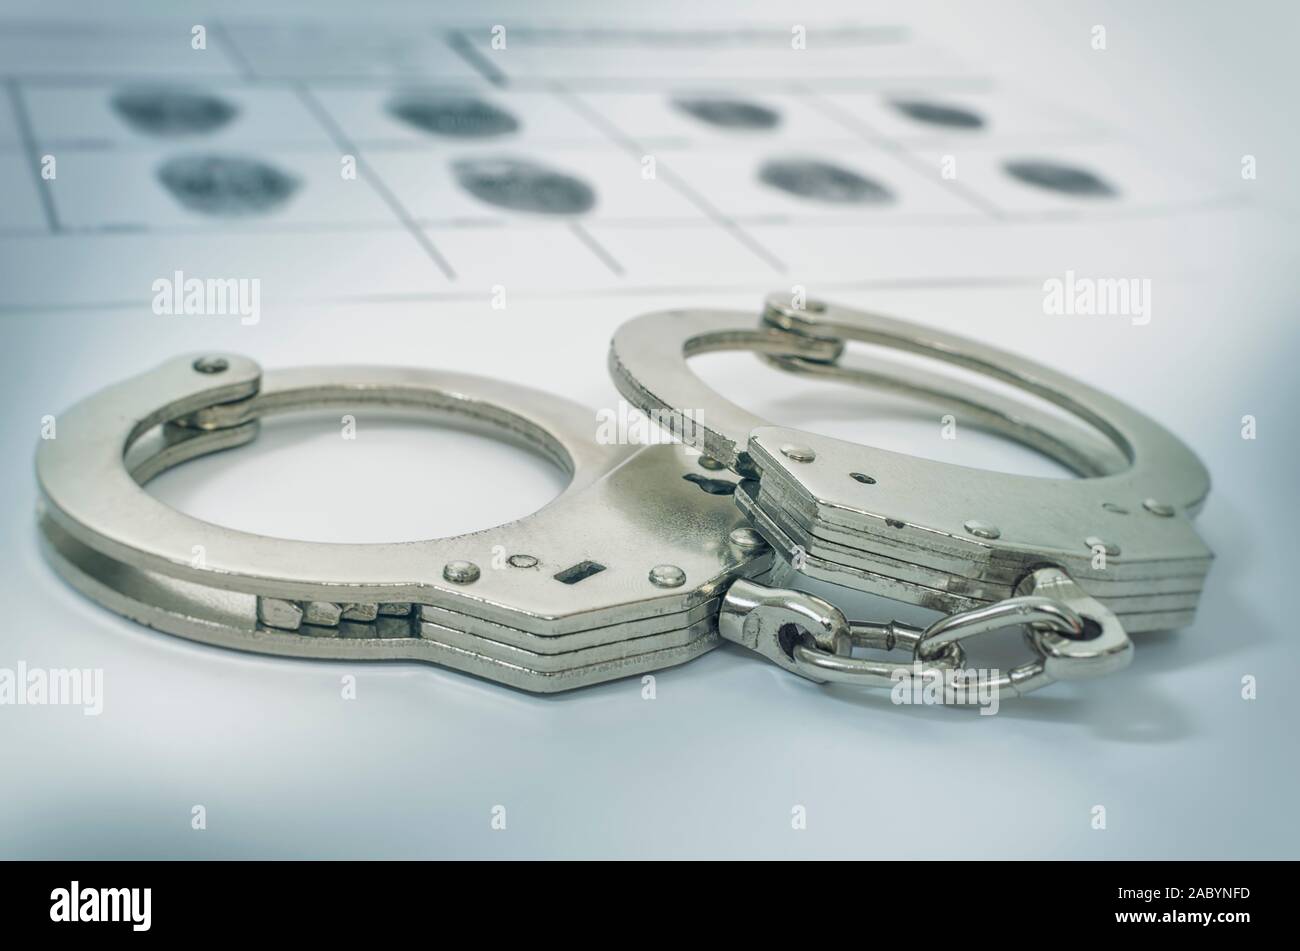 Police Handcuffs on fingerprints crime page file. Selective focus. Crime and violence concept Stock Photo